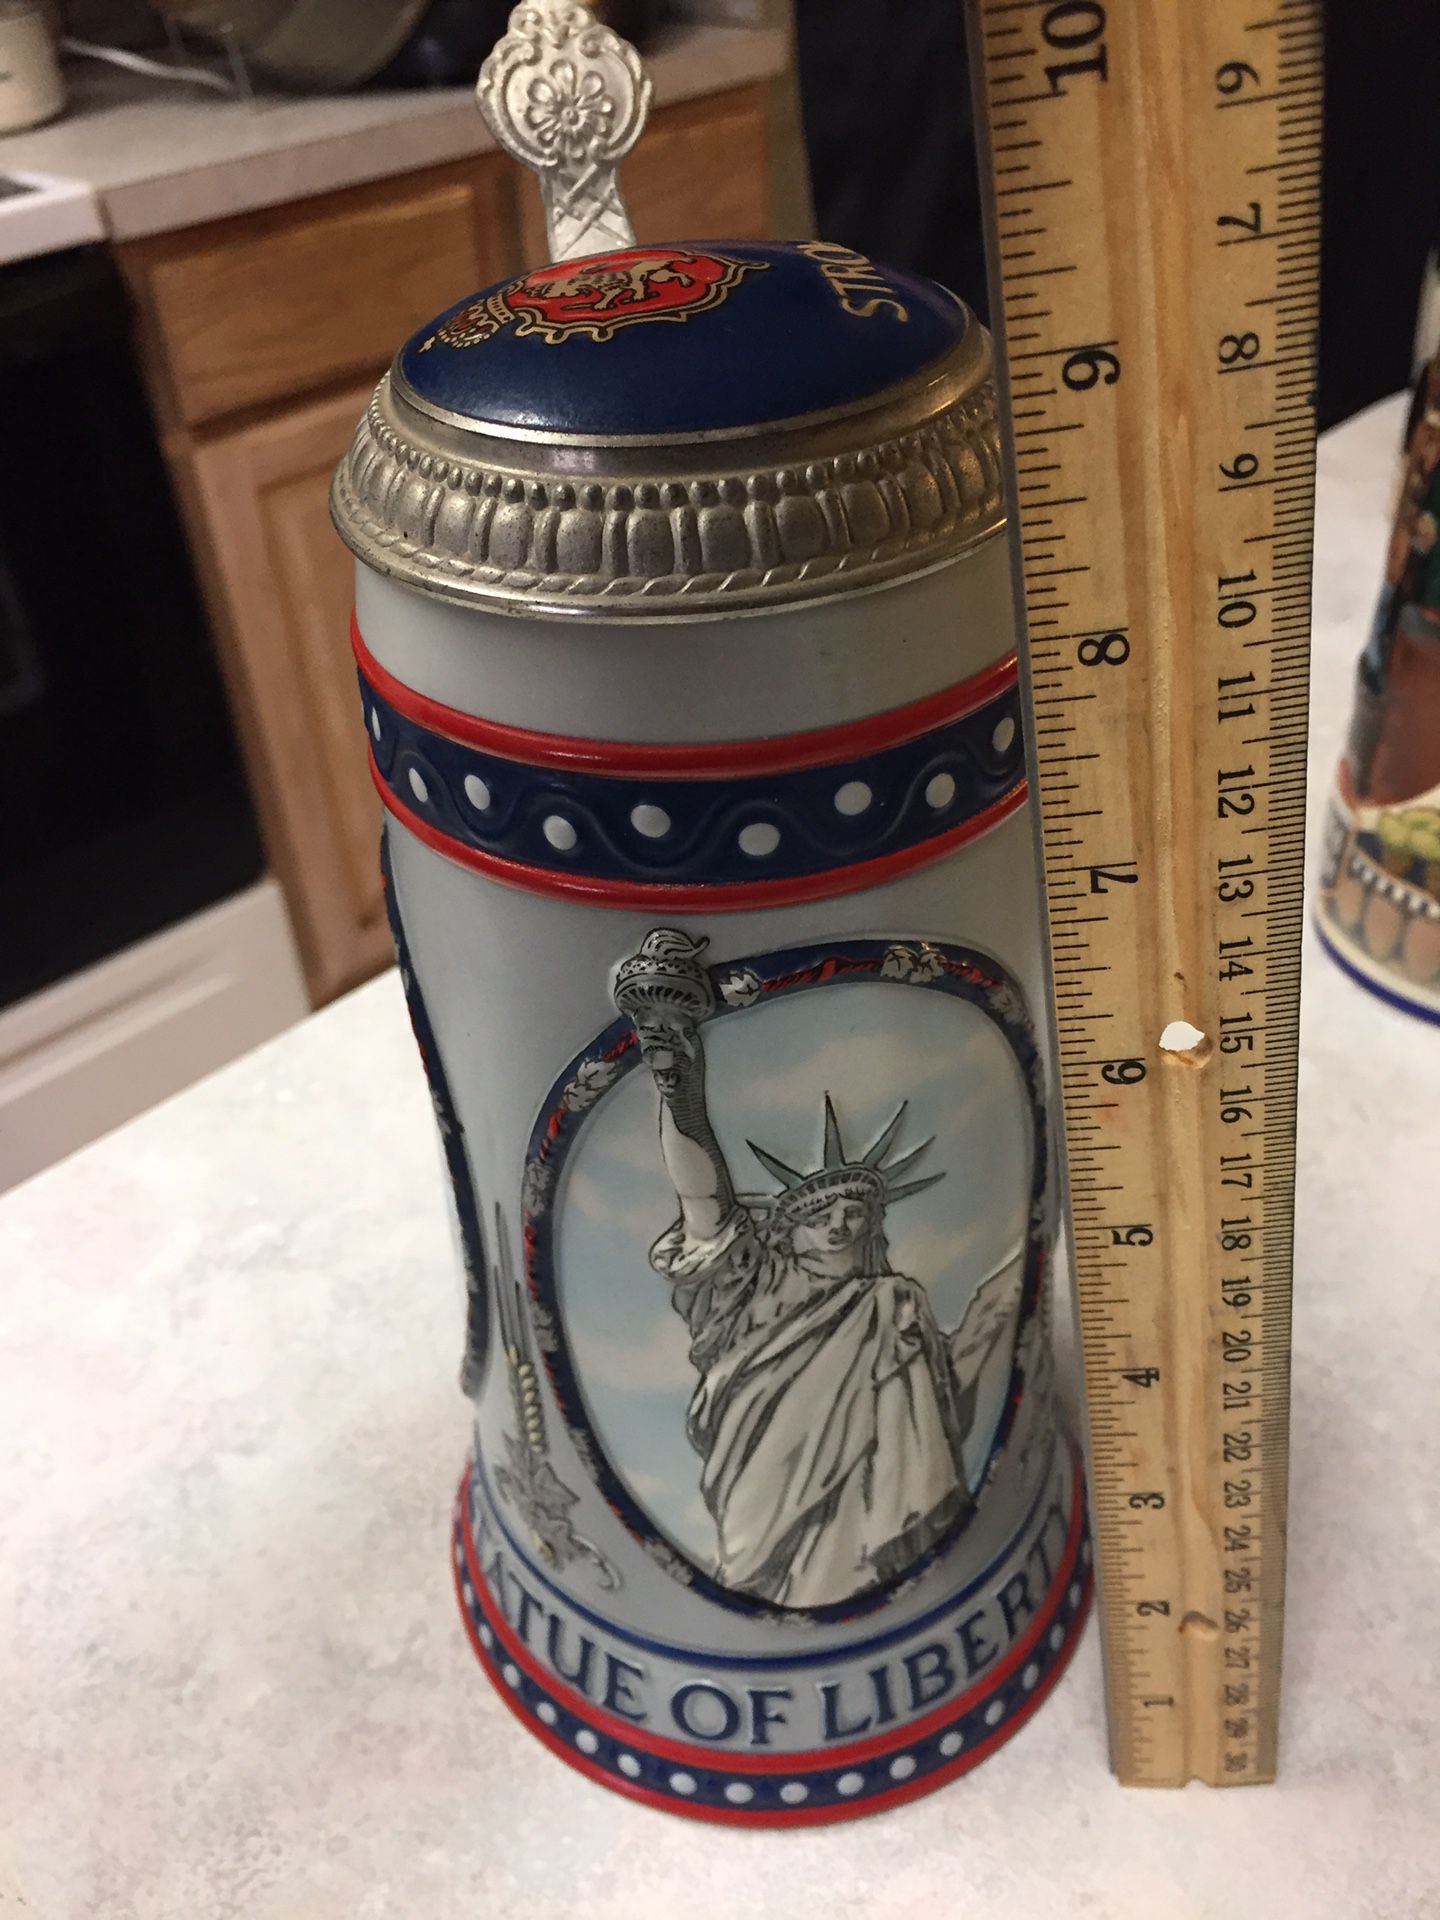 Statue of Liberty collectible Stein